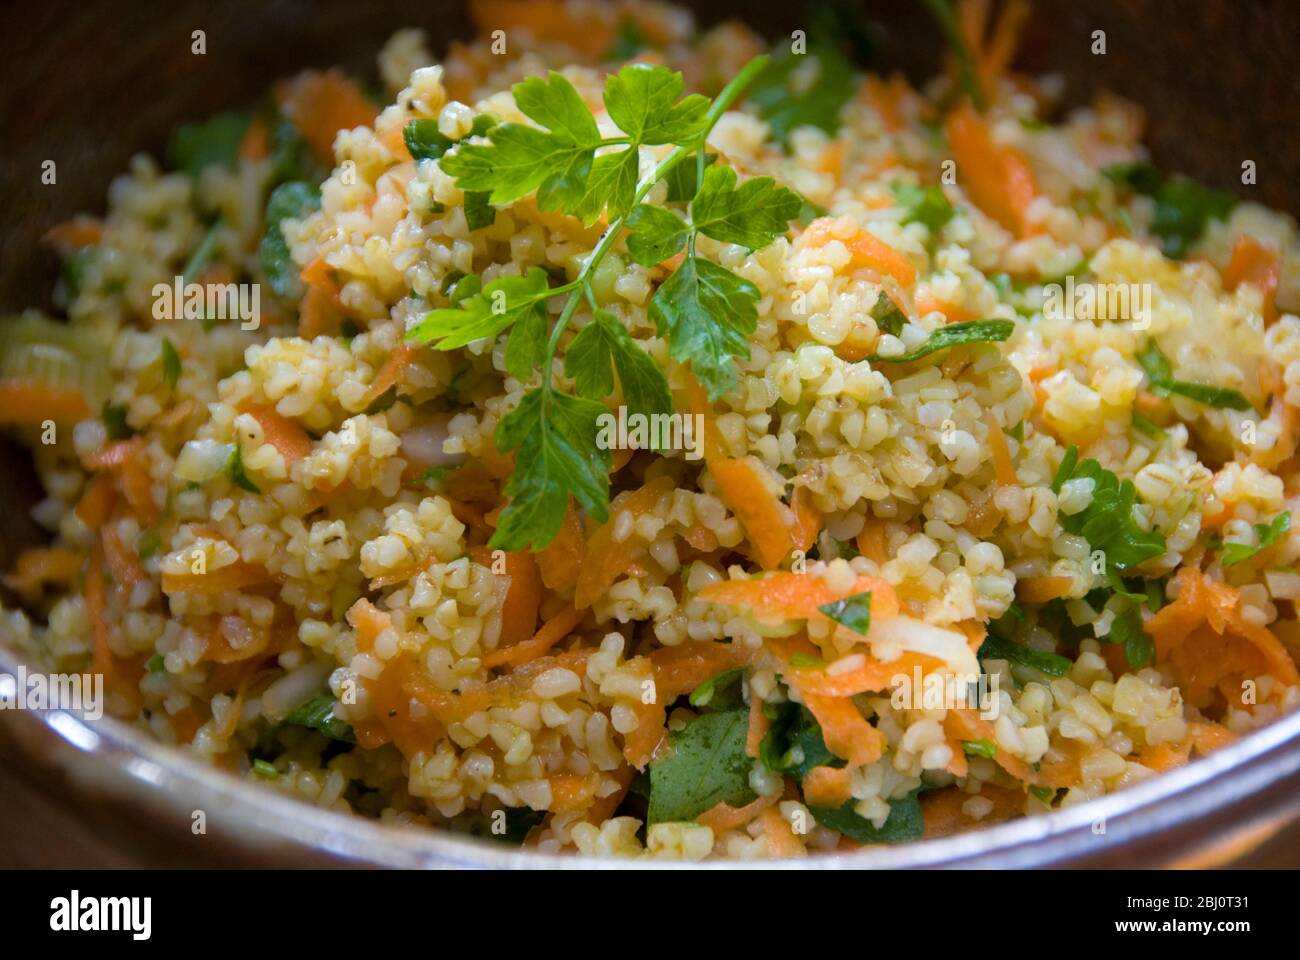 Healthy lunchtime salad of burghul wheat with grated carrot, lemon juice, olive oil, chopped cucumber and parsley. - Stock Photo